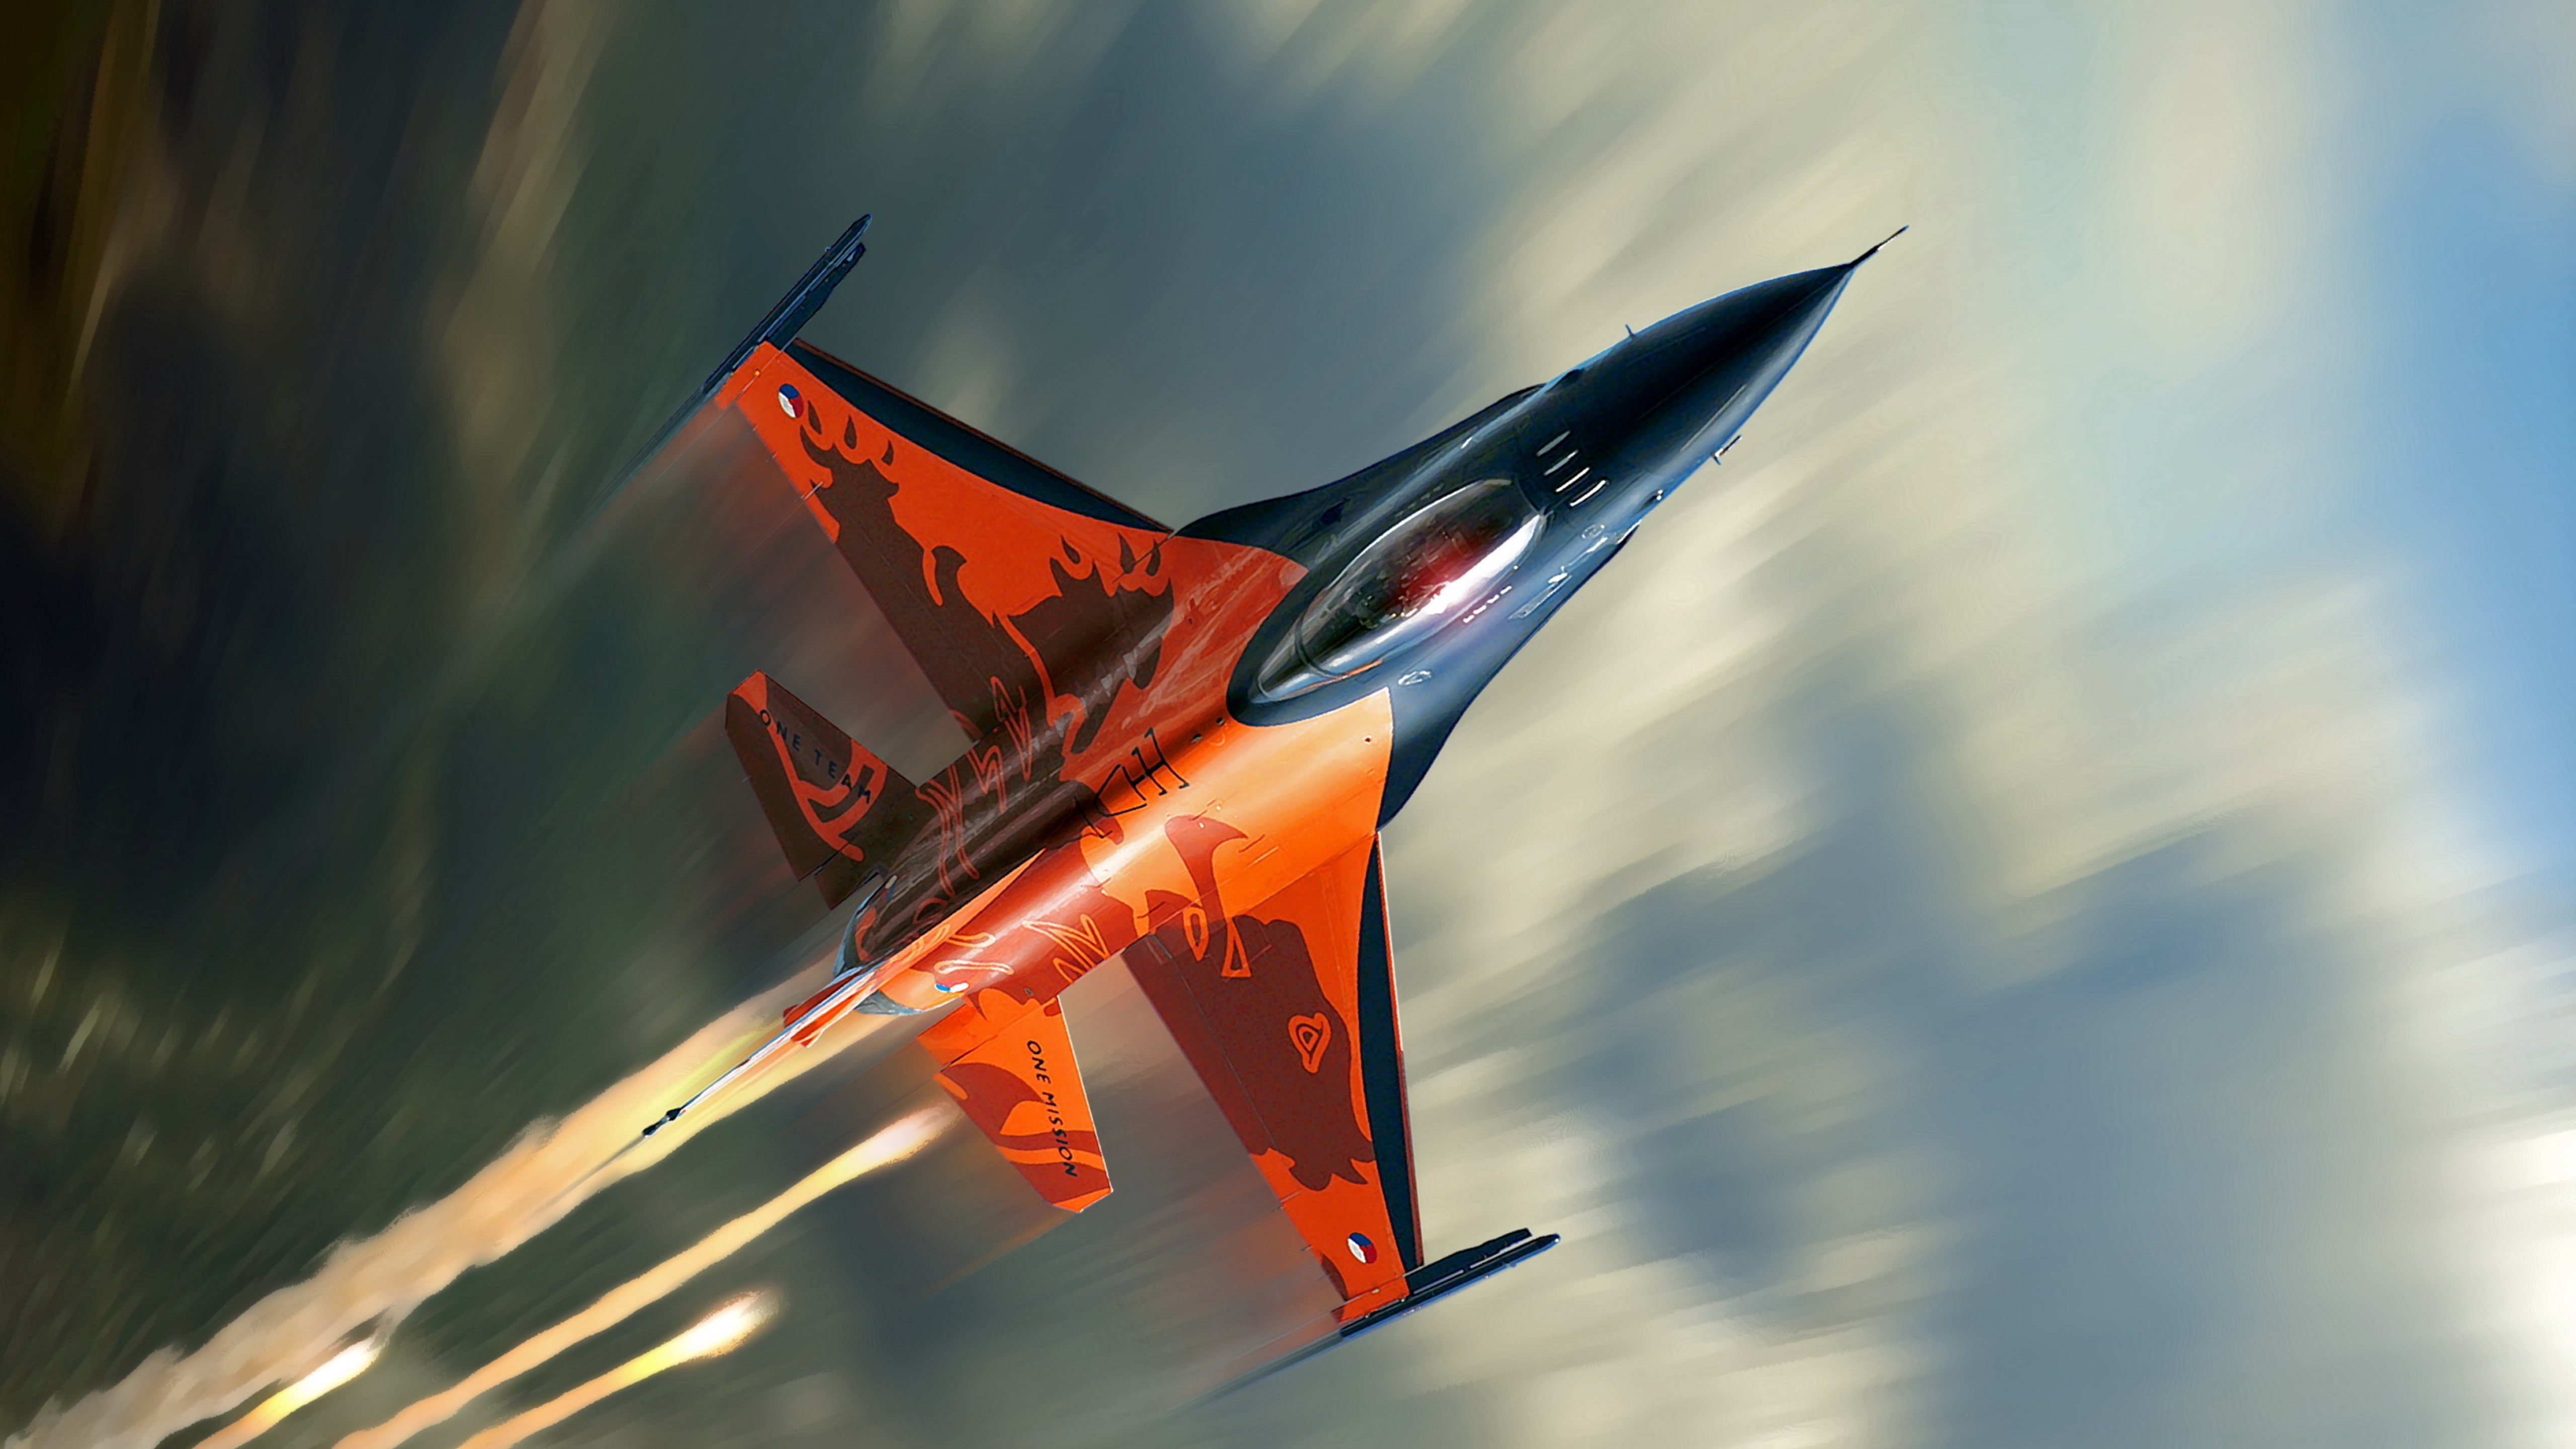 F 16 Falcon Fighter Jet Aircraft Us Air Force Wallpaper Hd For Mobile Phone 5120×2880